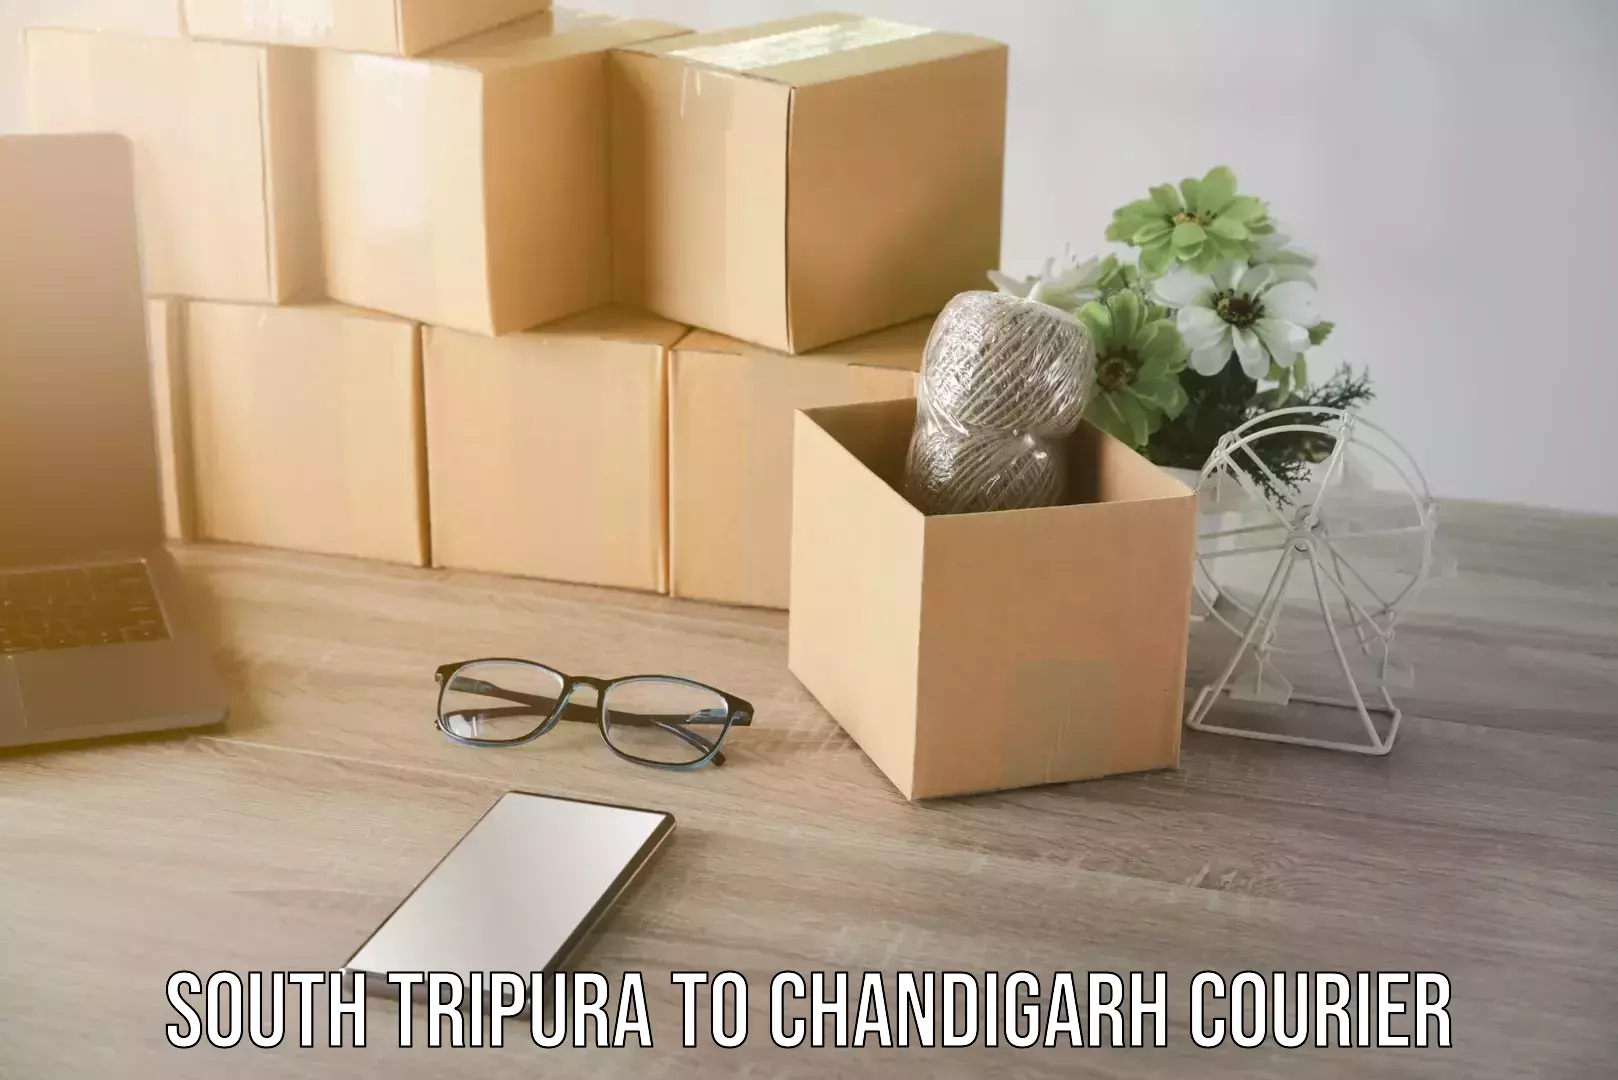 Express postal services South Tripura to Chandigarh